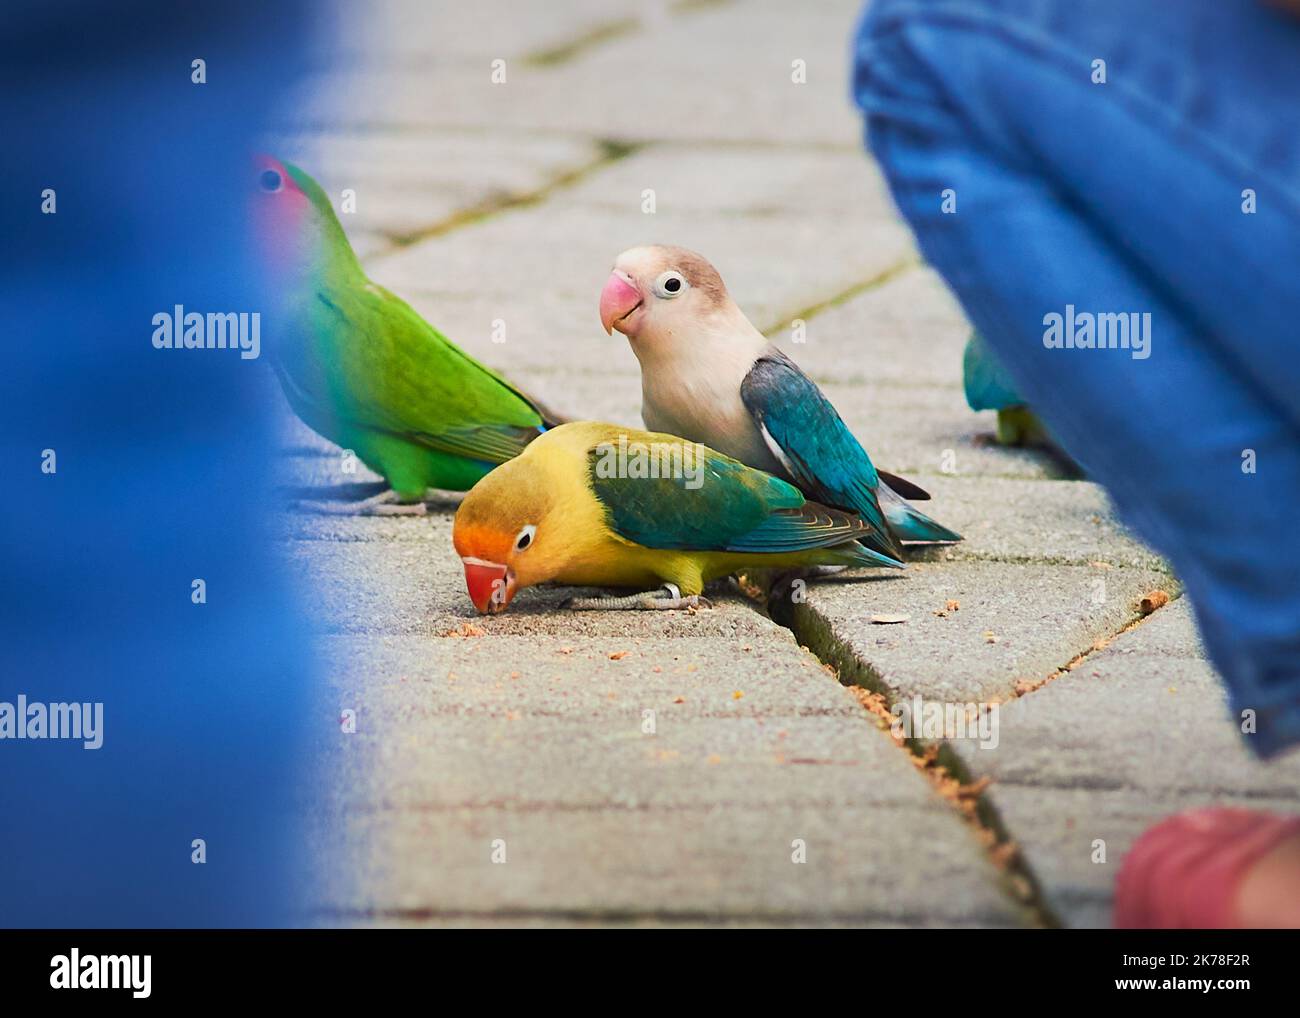 Love birds, parakeets, budgerigars and other small parrot like birds being fed by people in the aviary, view through walking people's feet Stock Photo